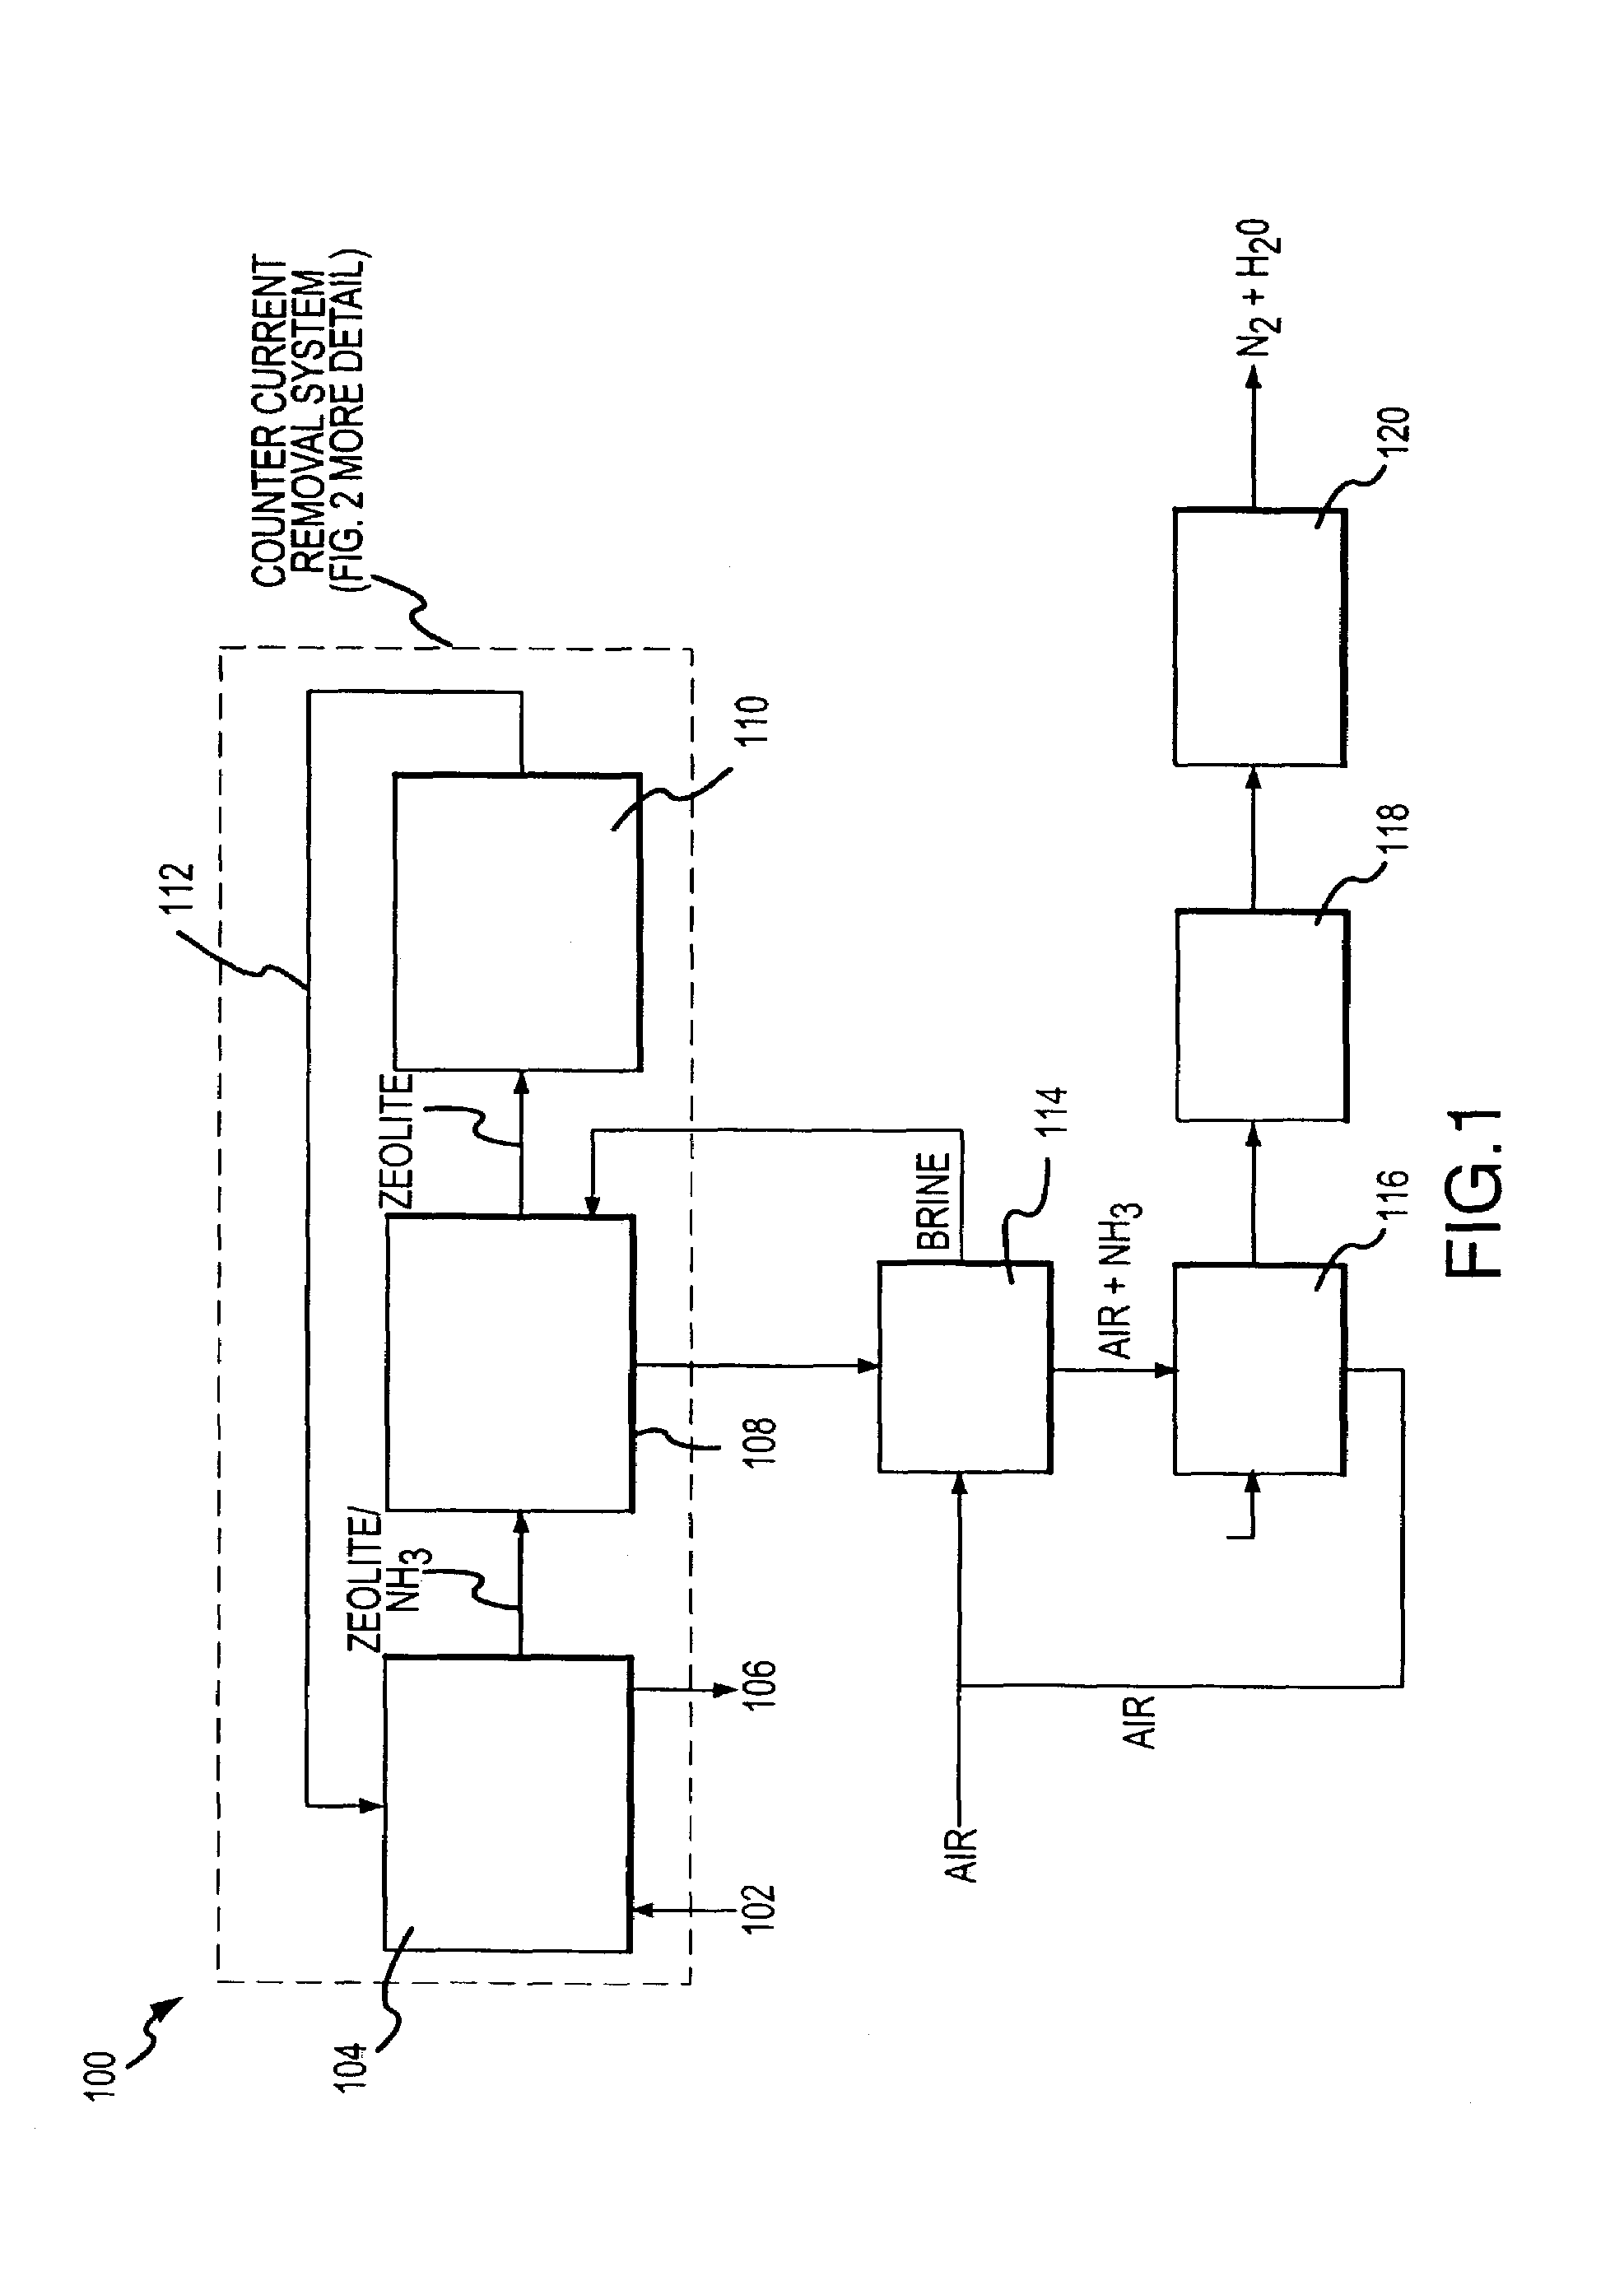 Apparatus for removal and destruction of ammonia from an aqueous medium